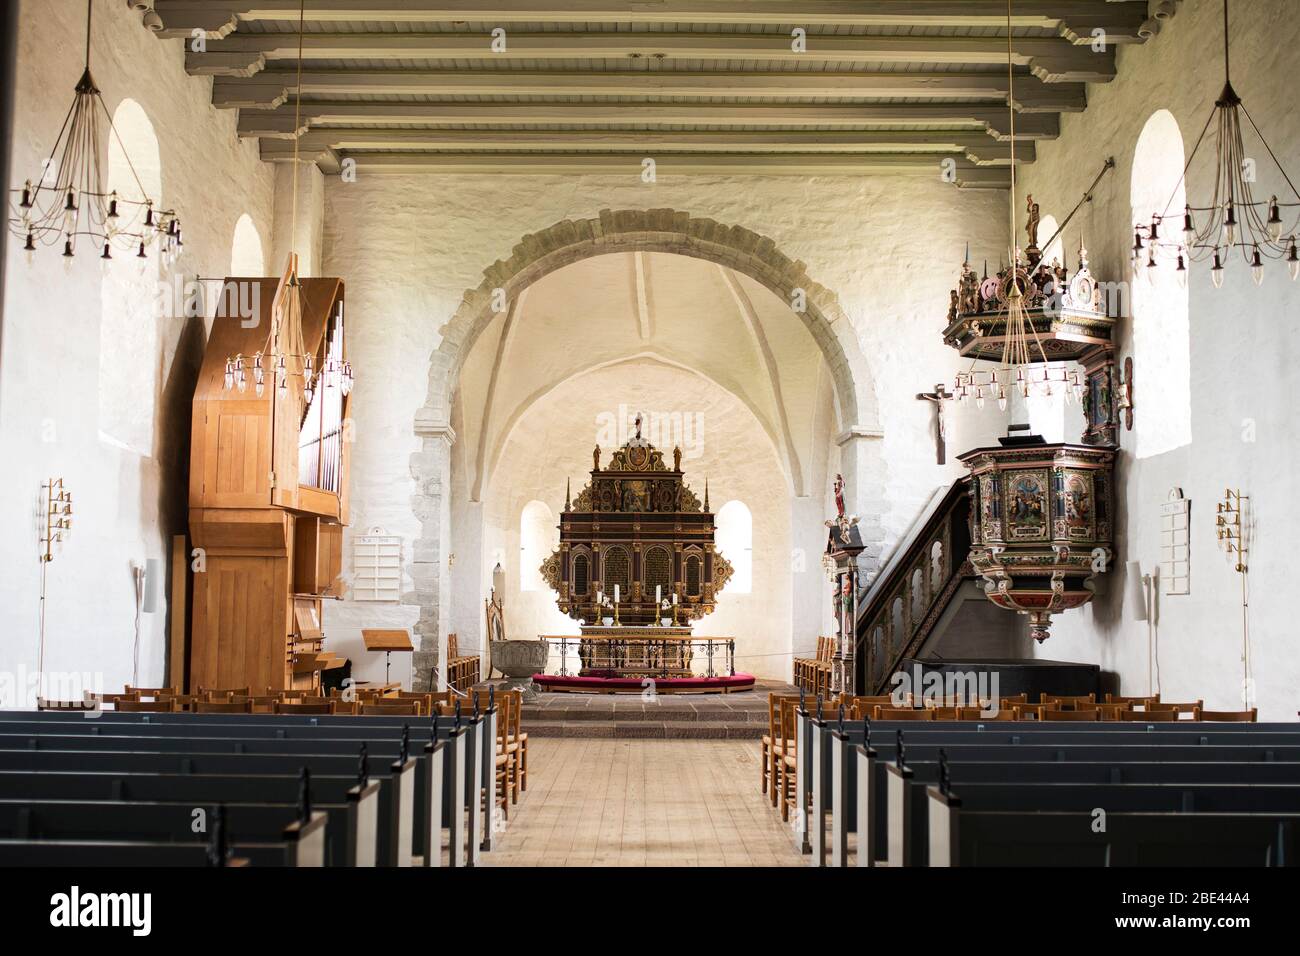 The interior of the Aa-kirke (Aa Church), a romanesque church with medieval origins, in the town of Aakirkeby on the island of Bornholm in Denmark. Stock Photo